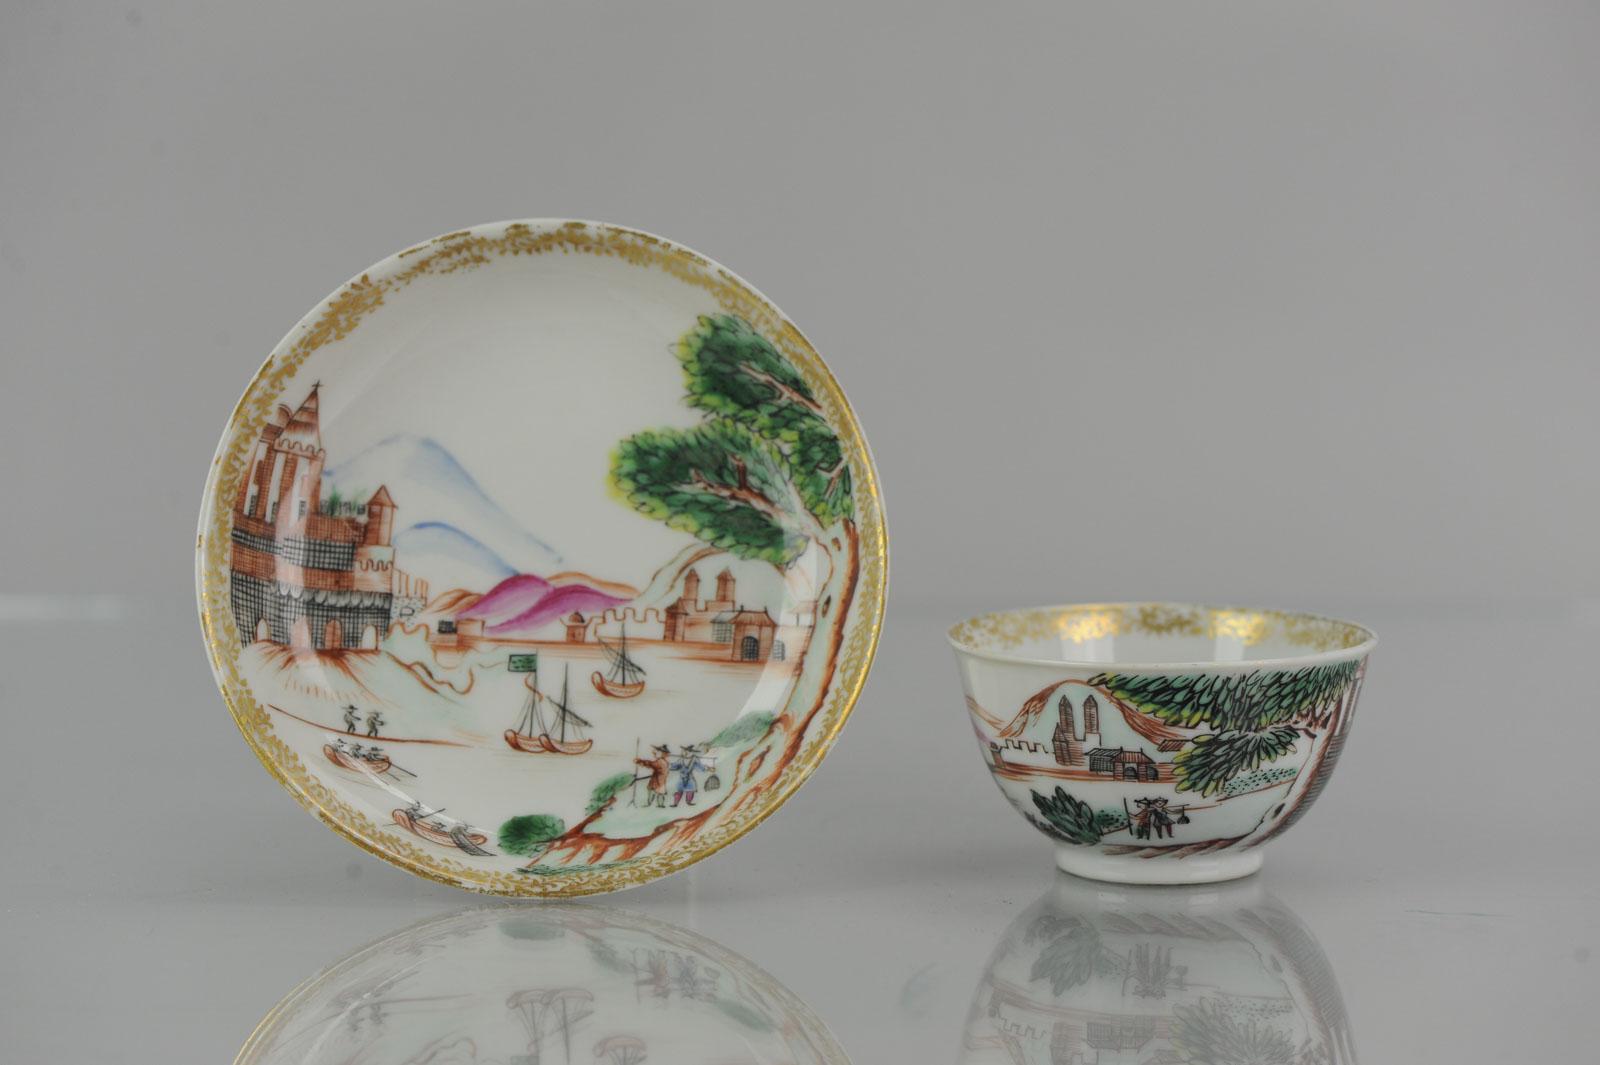 China

1750-1775

Measures: Height of teacup 43 mm (1.69 inch), diameter of rim 76 mm (2.99 inch), diameter of footring 34 mm (1.33 inch).

Height of saucer 23 mm (0.91 inch), diameter of rim 120 mm (4.72 inch), diameter of footring 72 mm